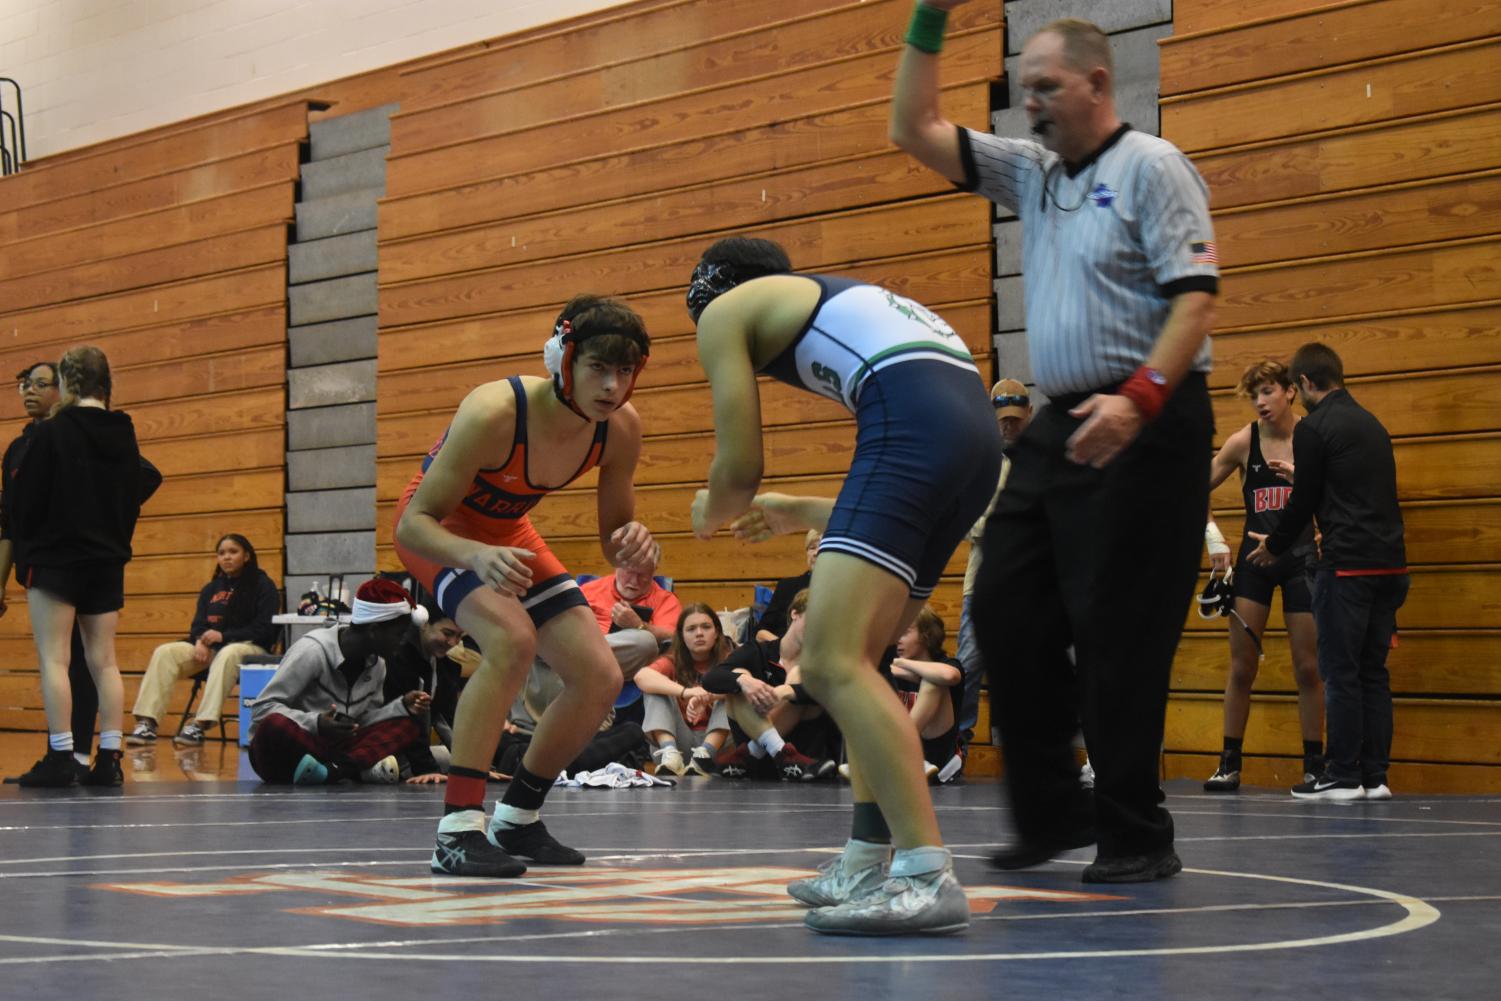 NC freshman Jayden Bryant prepares to compete against his opponent, Brodee Tull from Harrison High School. Bryant proceeded to win the match by pinning his opponent on the mat. He later placed third overall in the 132 lbs weight class for the tournament.